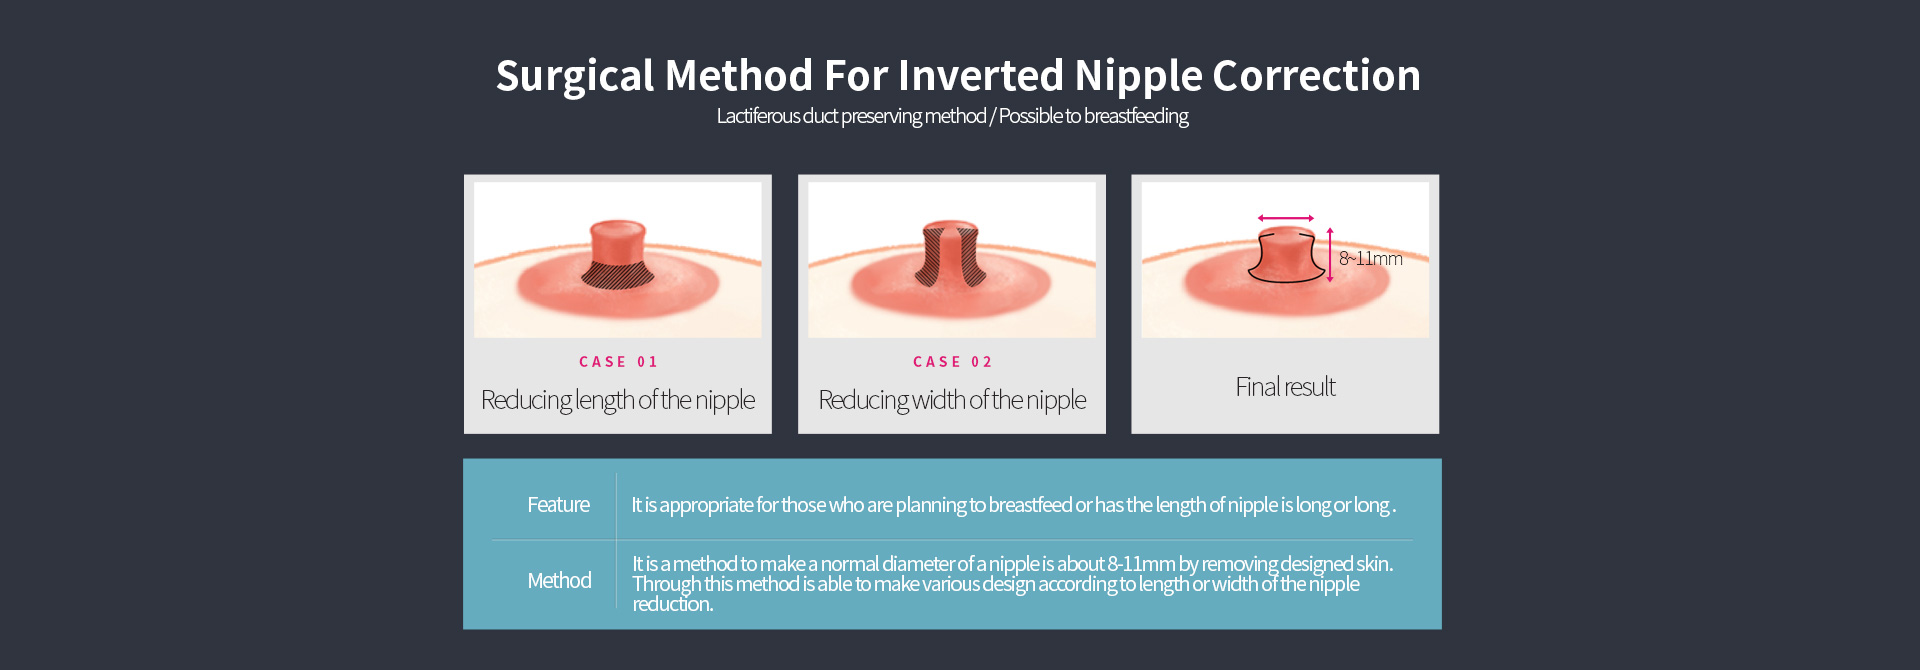 Surgical Method For Inverted Nipple Correction, step 1. Reducing length of the nipple, step 2. Reducing width of the nipple, step 3. Final result